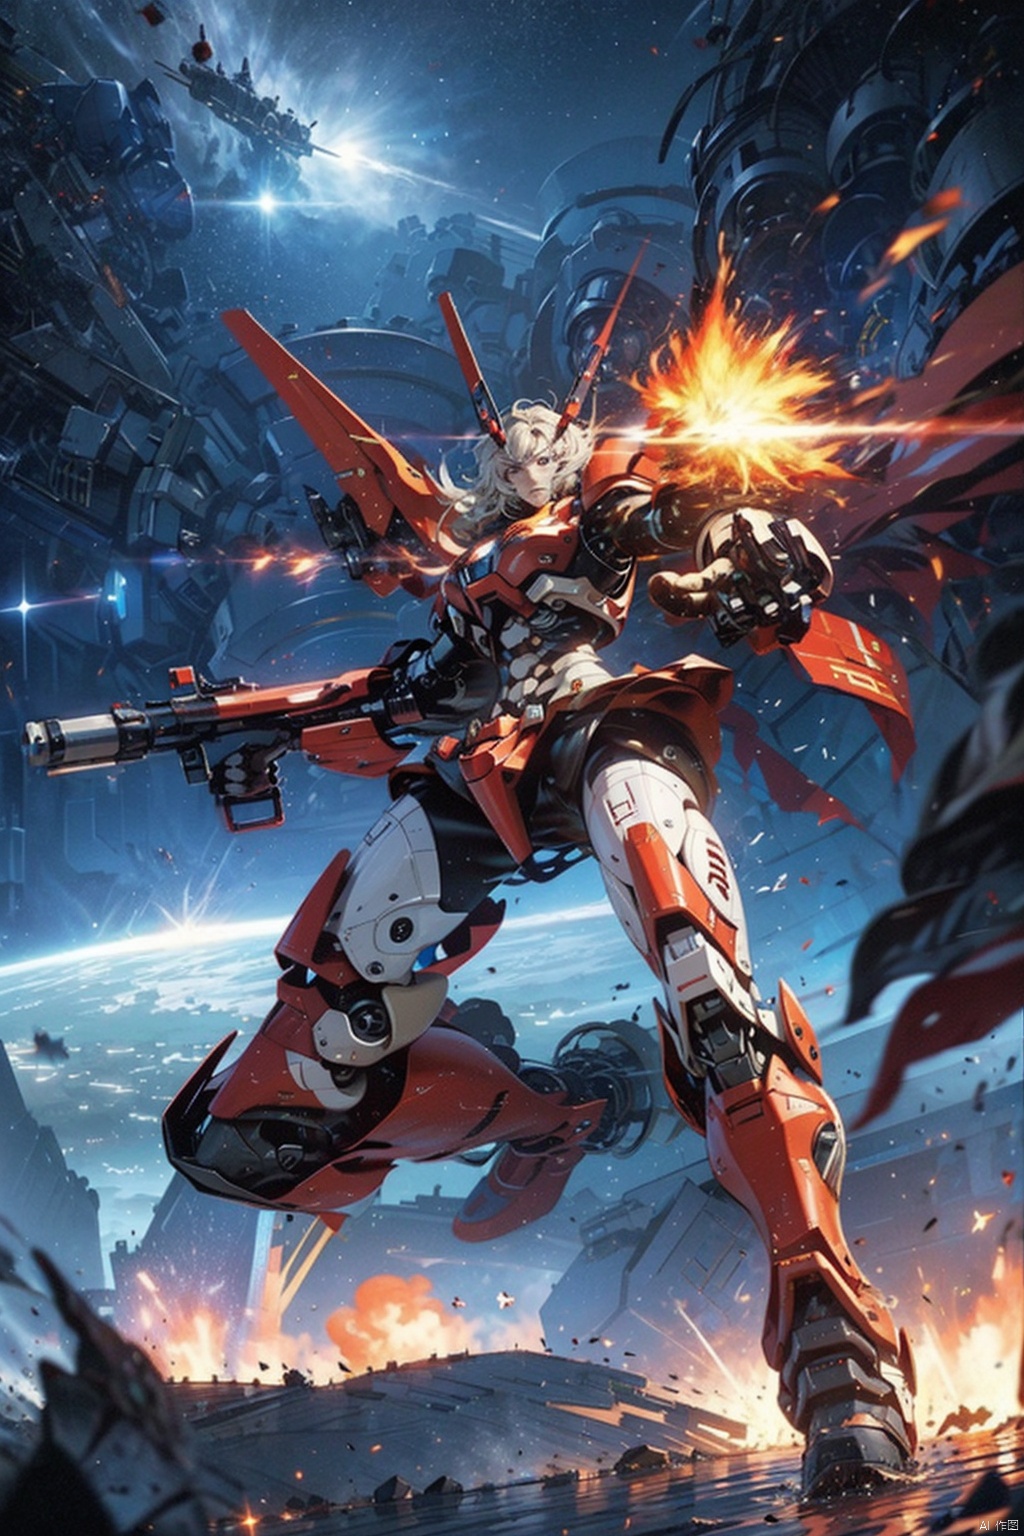  ,Combat attitude,Explosion effect,Sparks flew everywhere,Flame rise,Flying in space,Giant planet behind,mecha_robot,Superperspective, ,,,, machinery